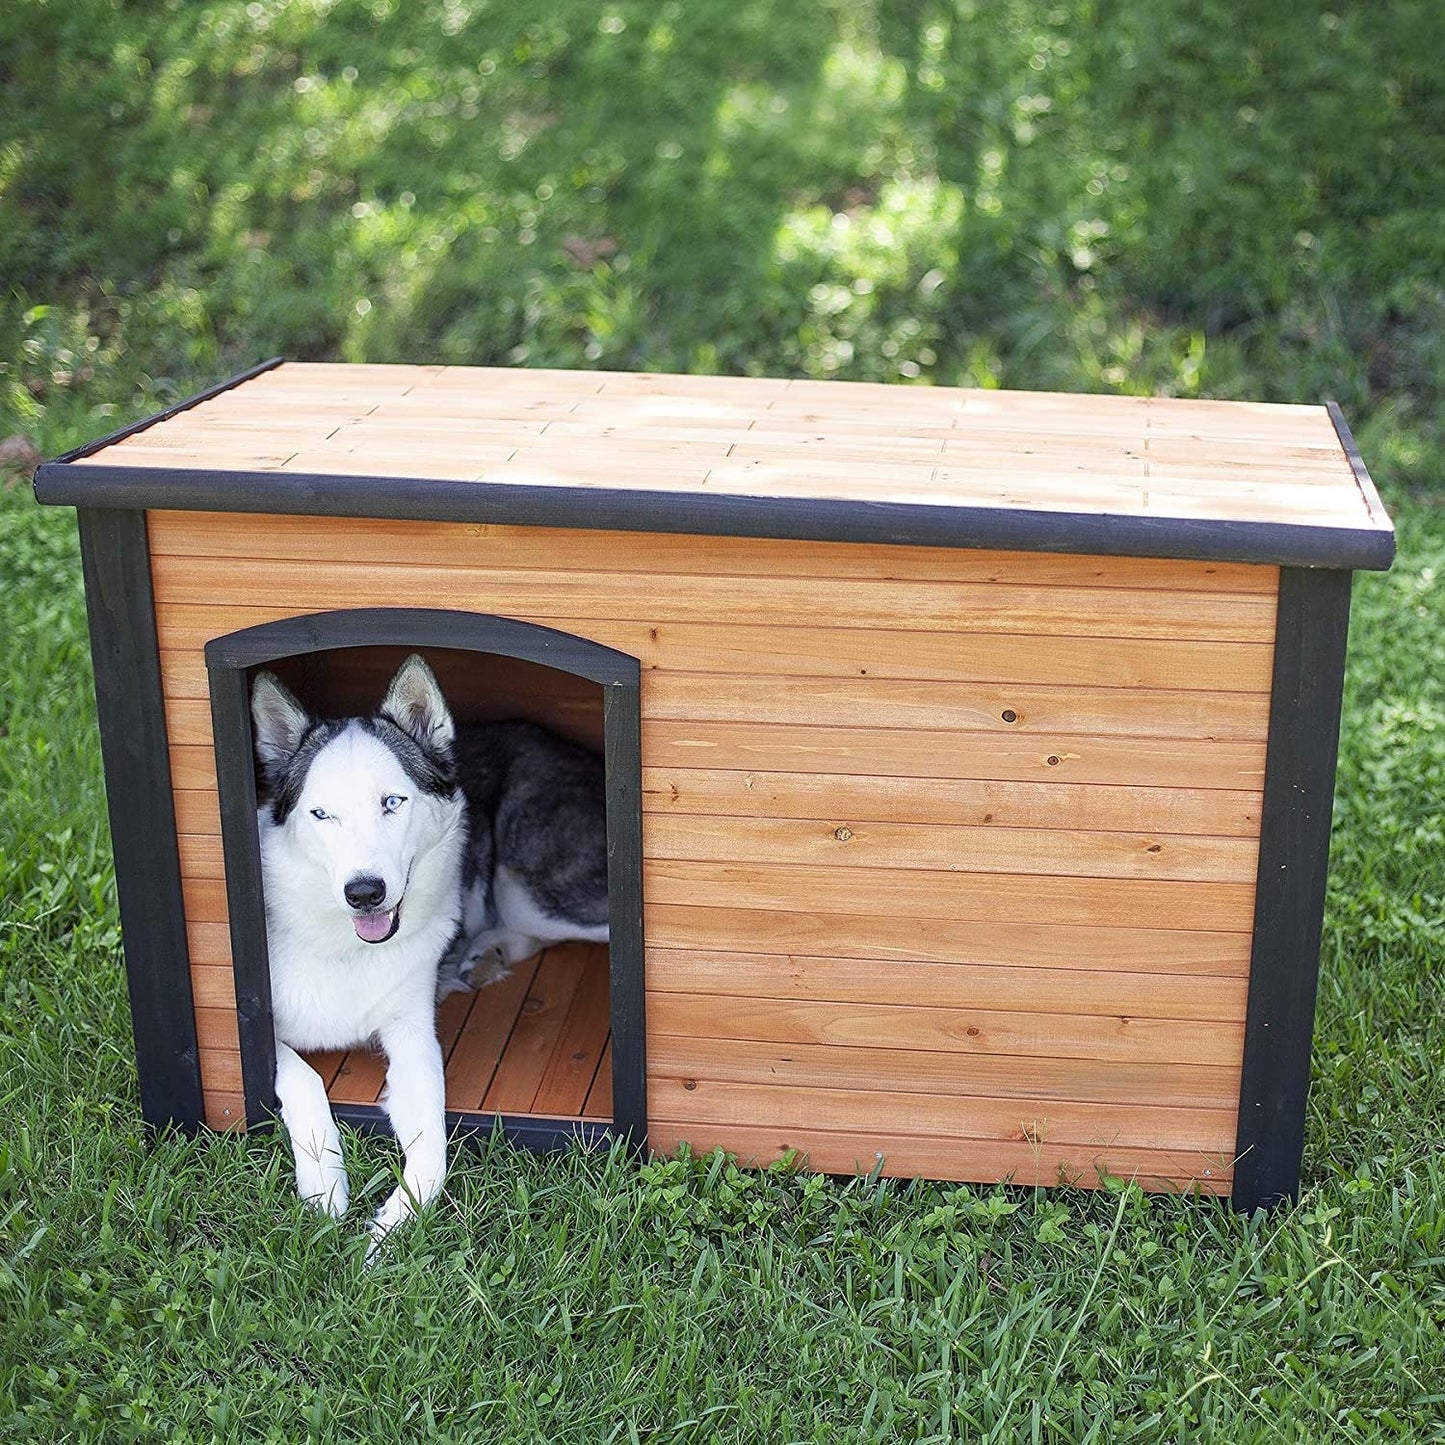 Log Cabin Doghouse for Small dogs.